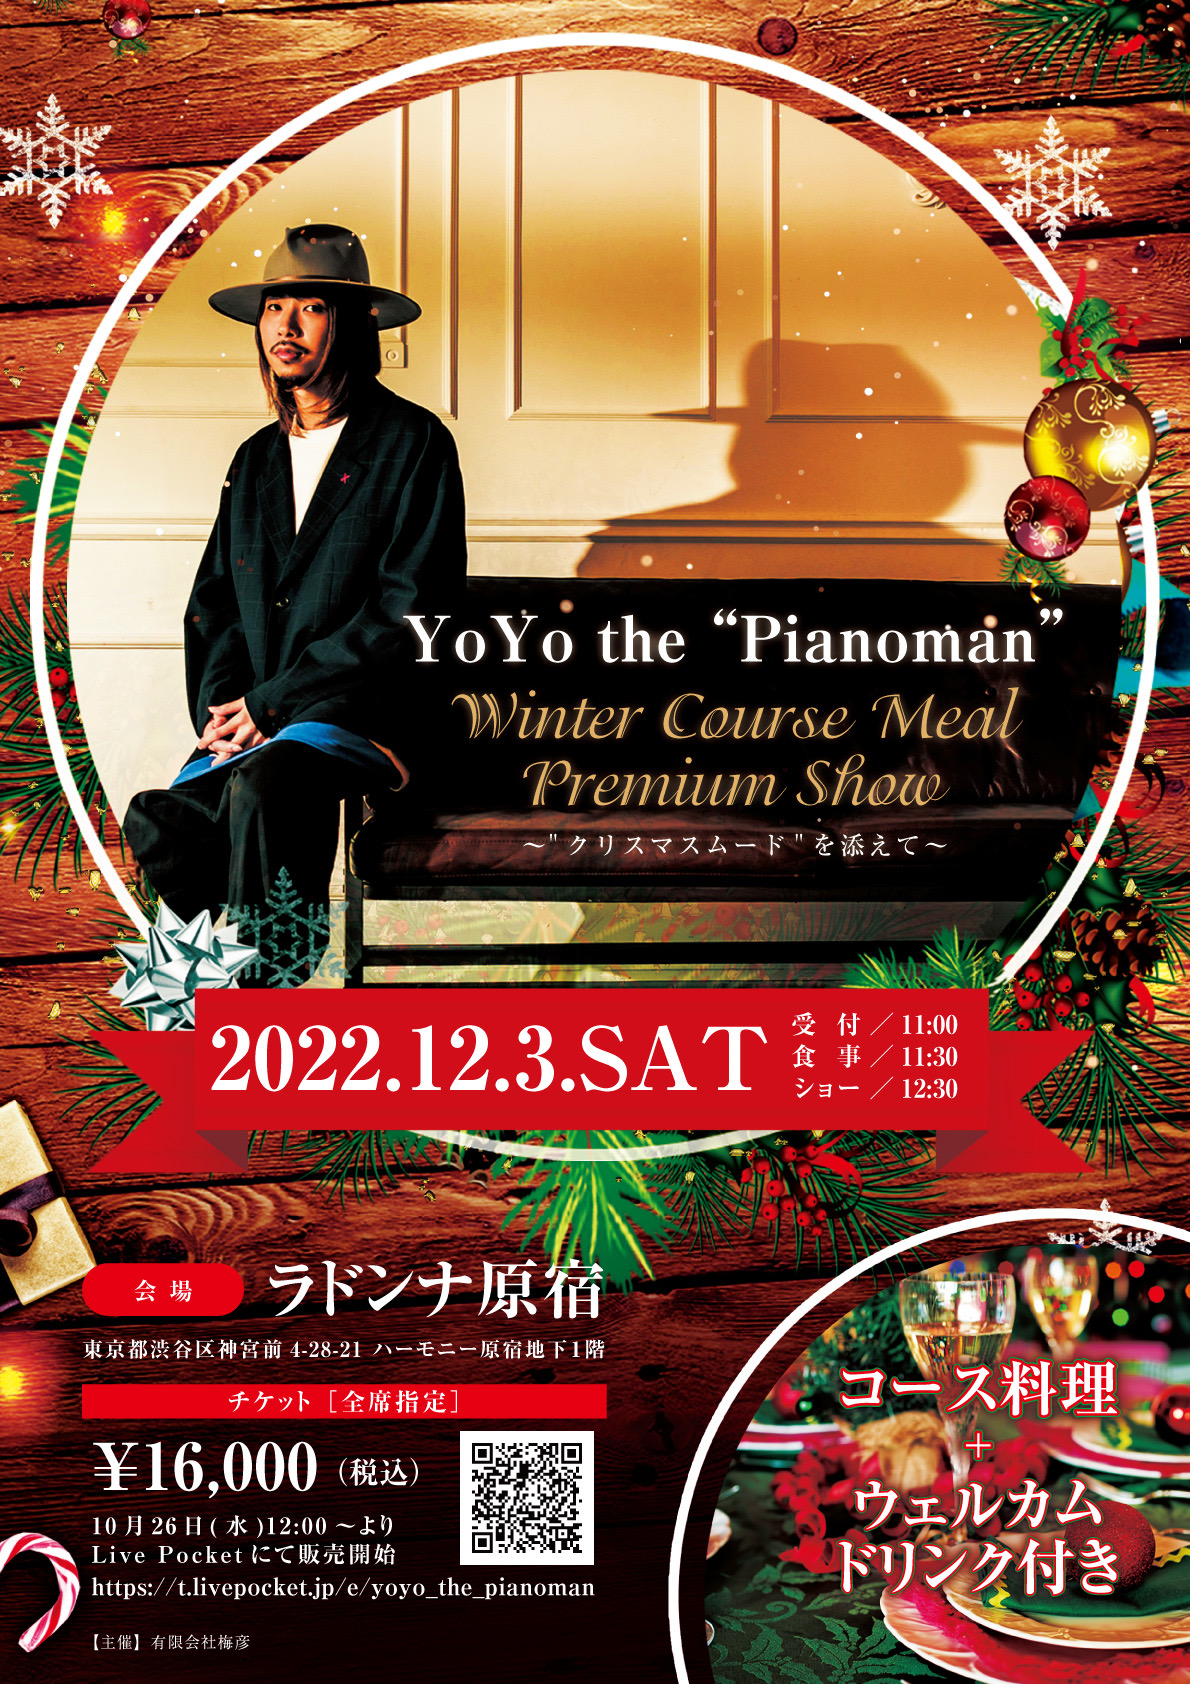 YoYo the "Pianoman" Winter Course Meal Premium Show〜 "クリスマスムード"を添えて〜